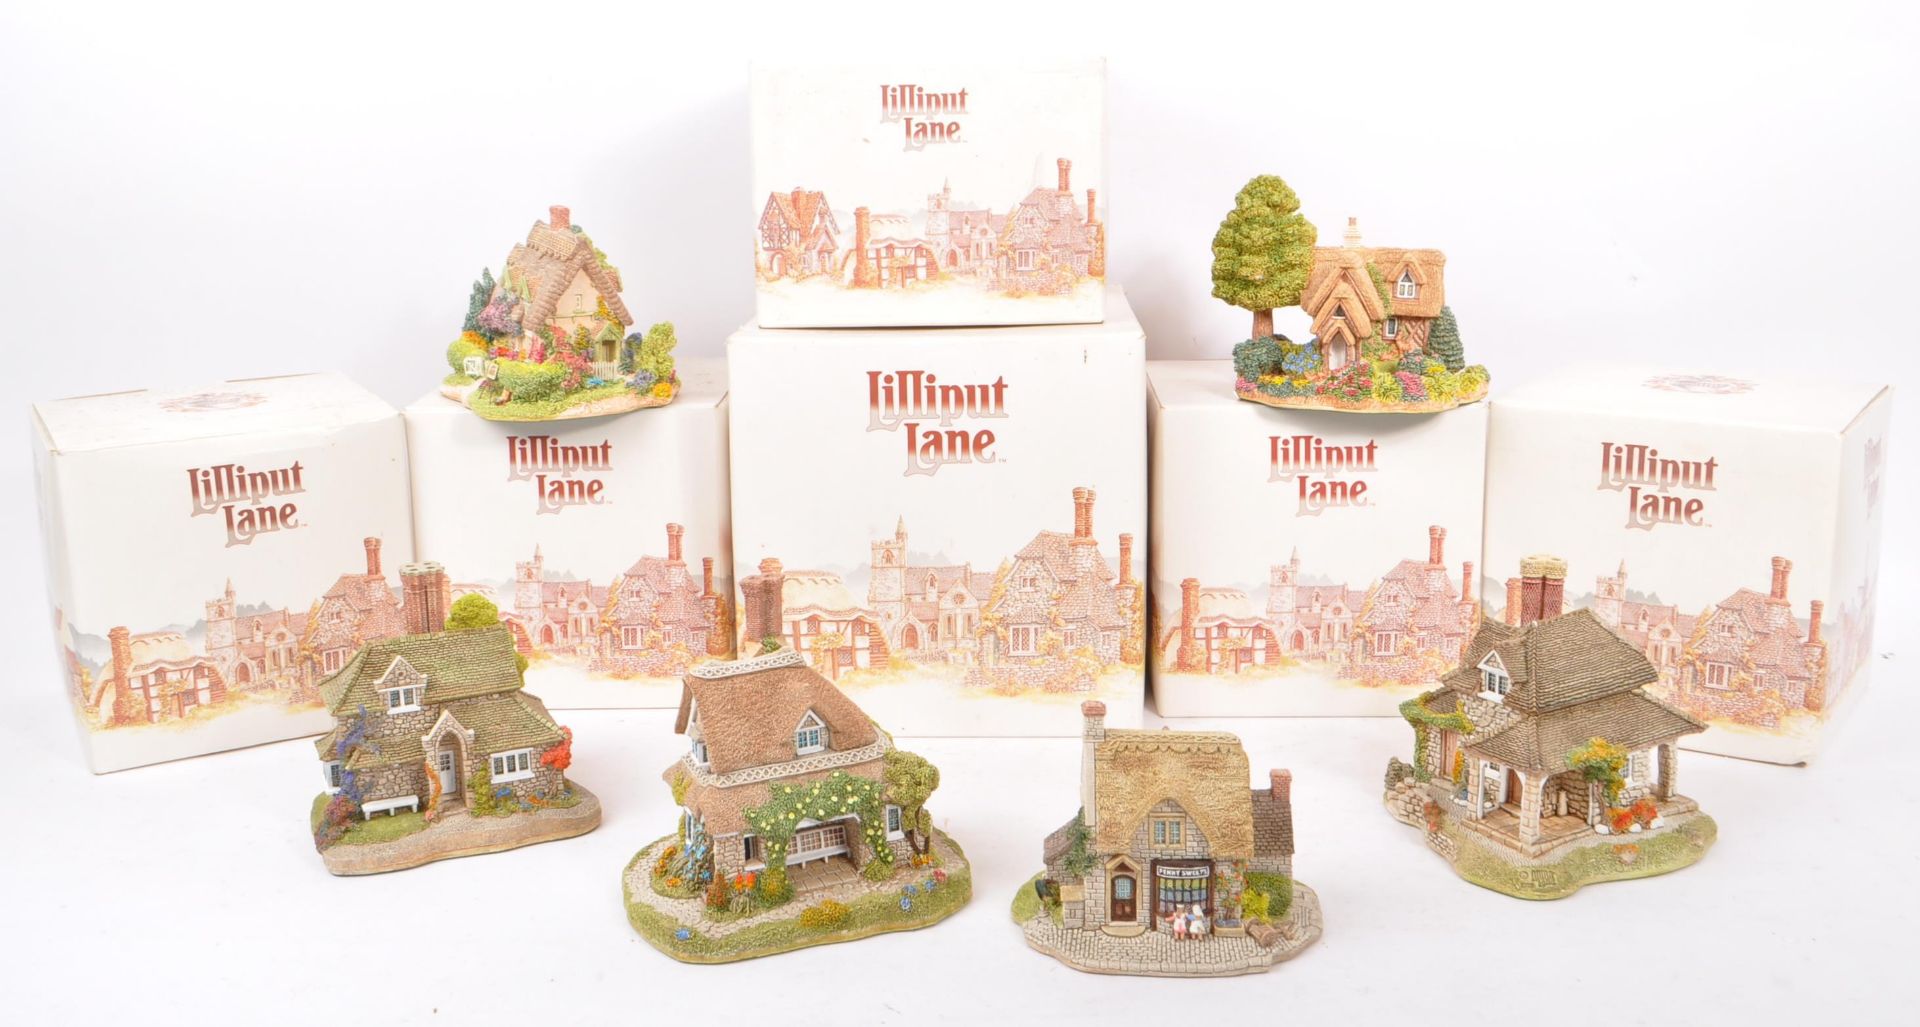 LILLIPUT LANE - COLLECTION OF HOUSE / COTTAGE FIGURINES